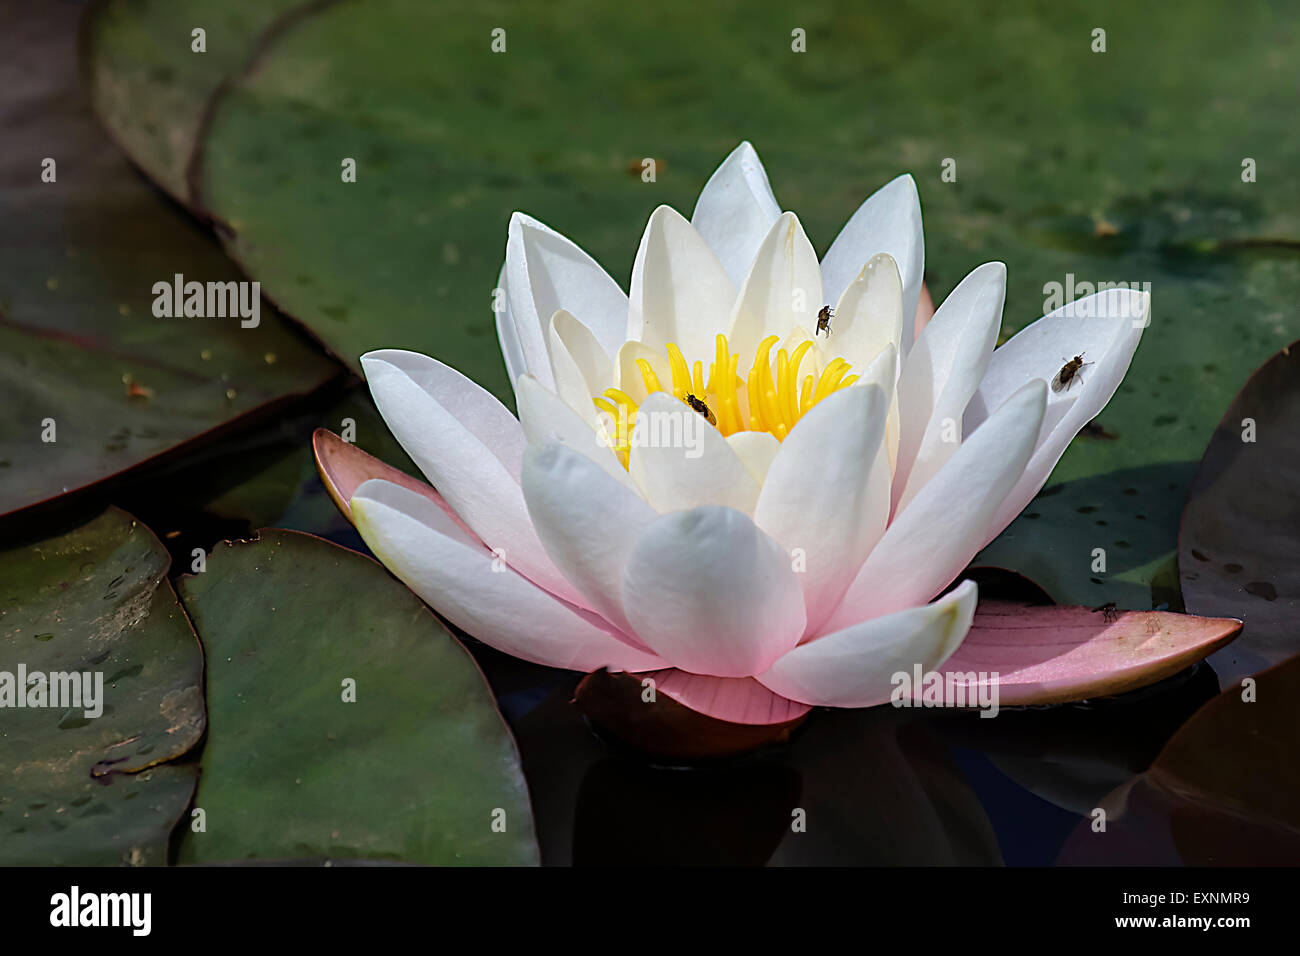 Single flower of a water lily on a bed of leaves with flies on the petals Stock Photo